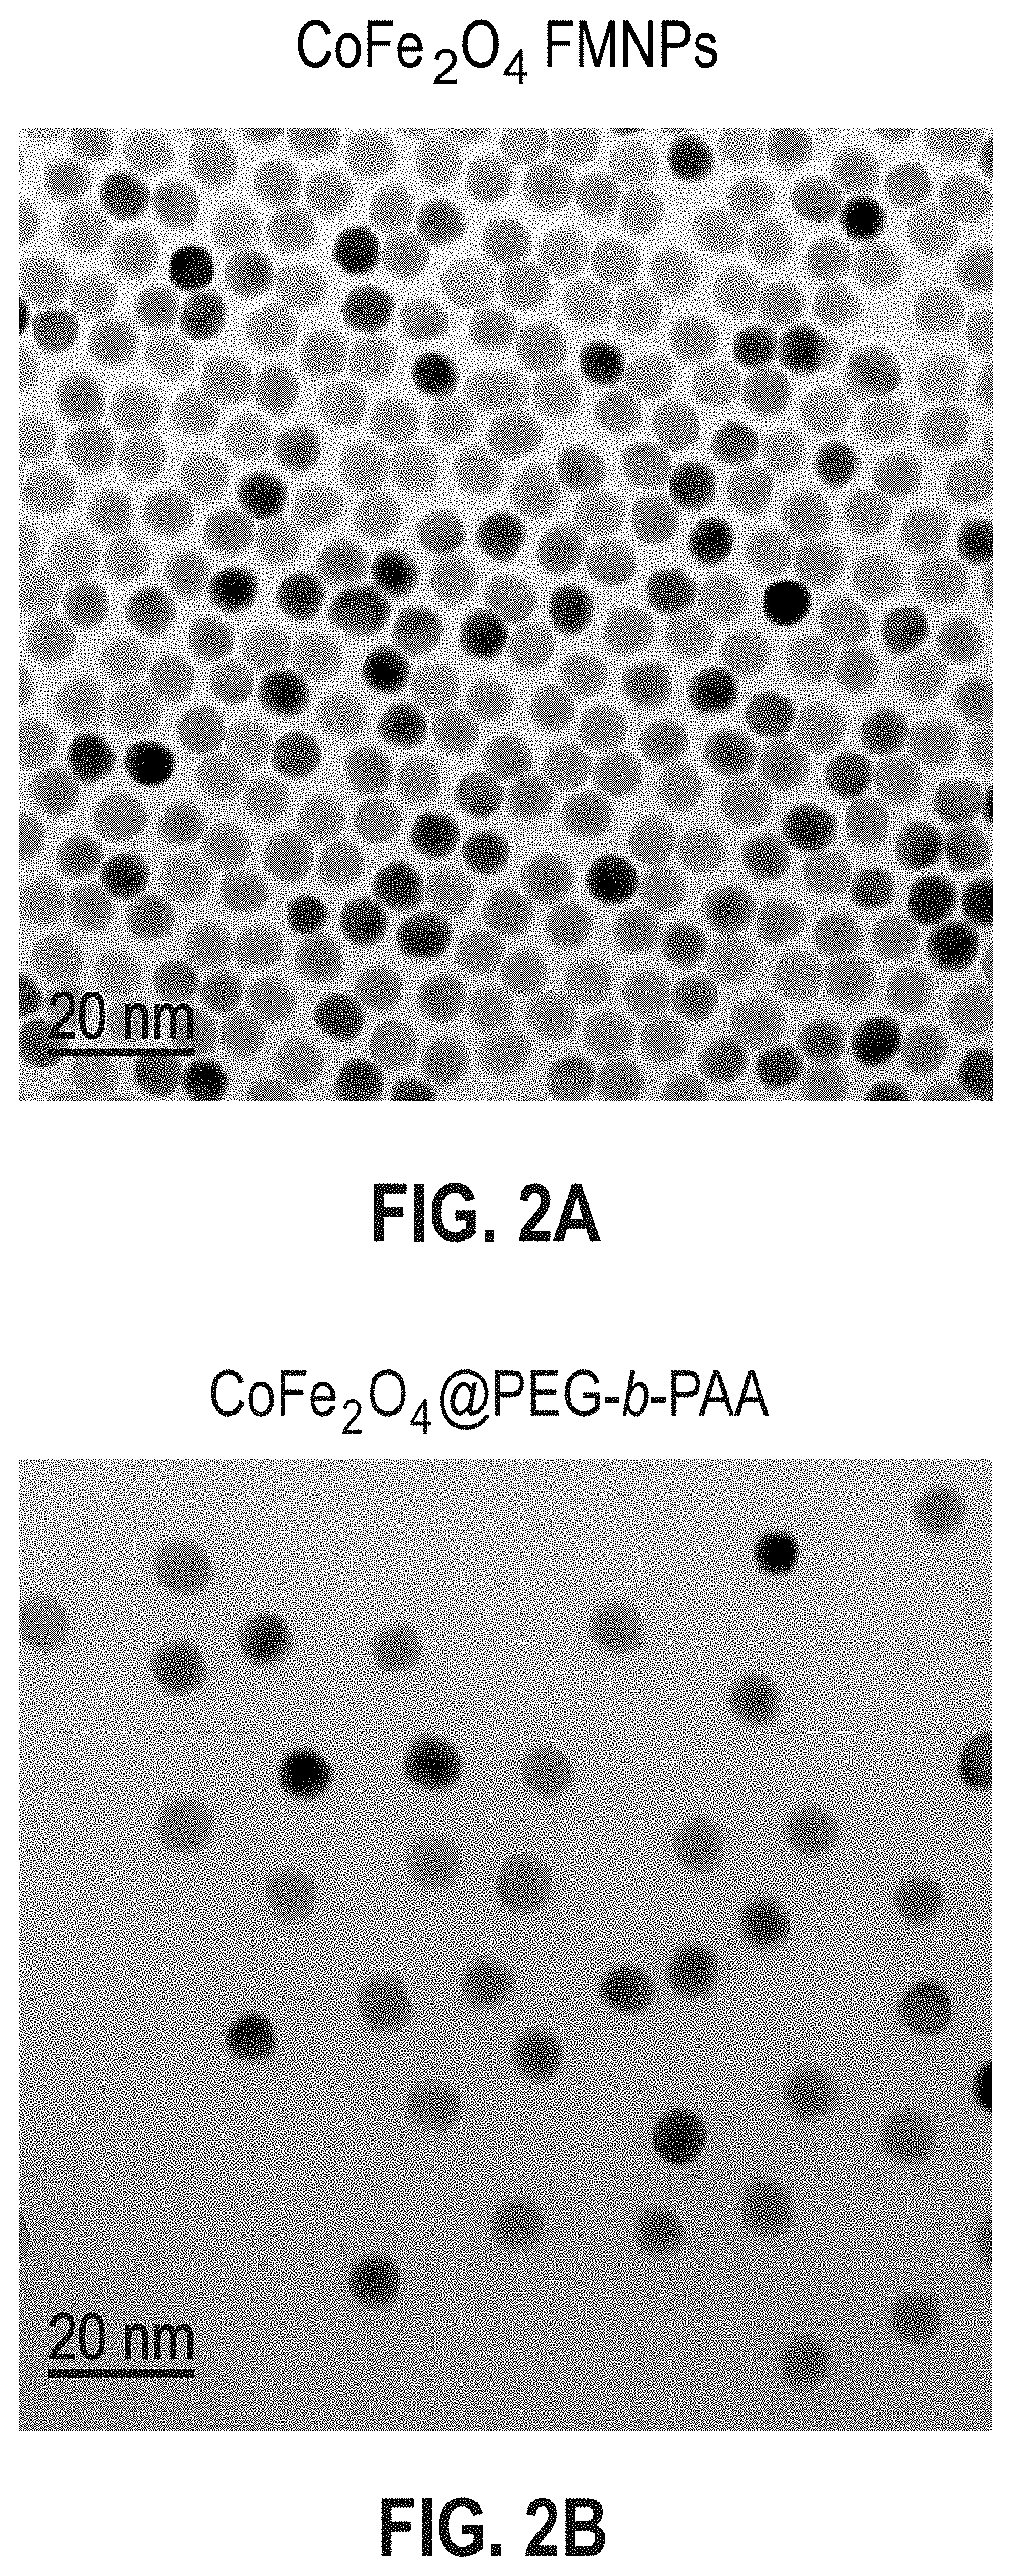 Aqueous soluble ferrimagnets stabilized by block copolymers